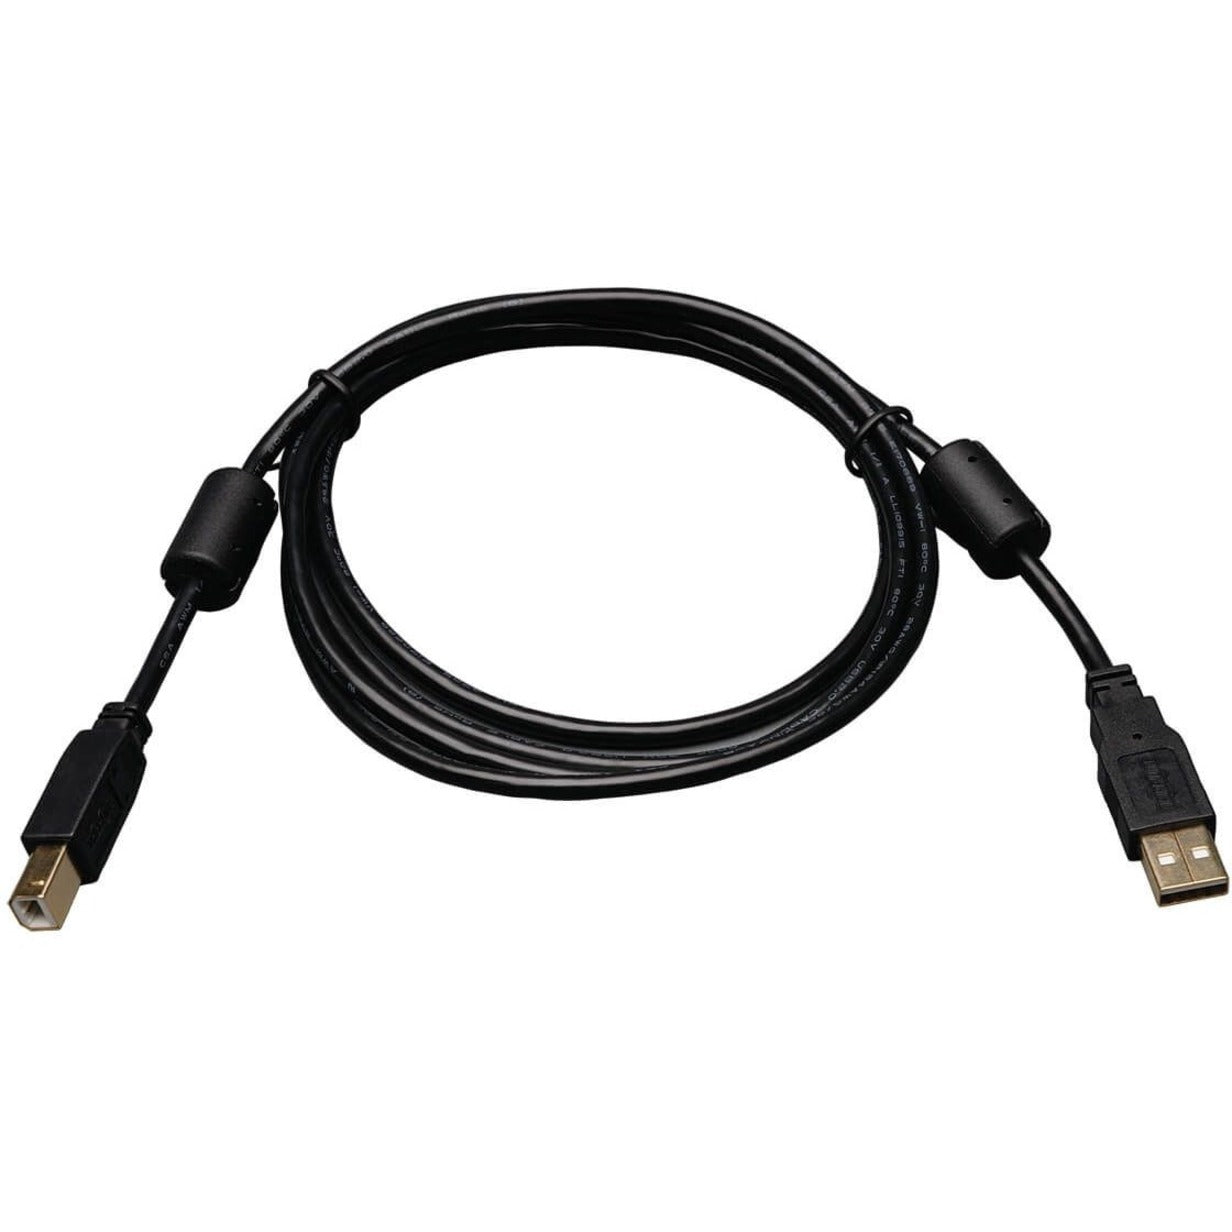 Tripp Lite U023-003 3-ft. USB2.0 A/B Gold Device Cable with Ferrite Chokes, Data Transfer Cable